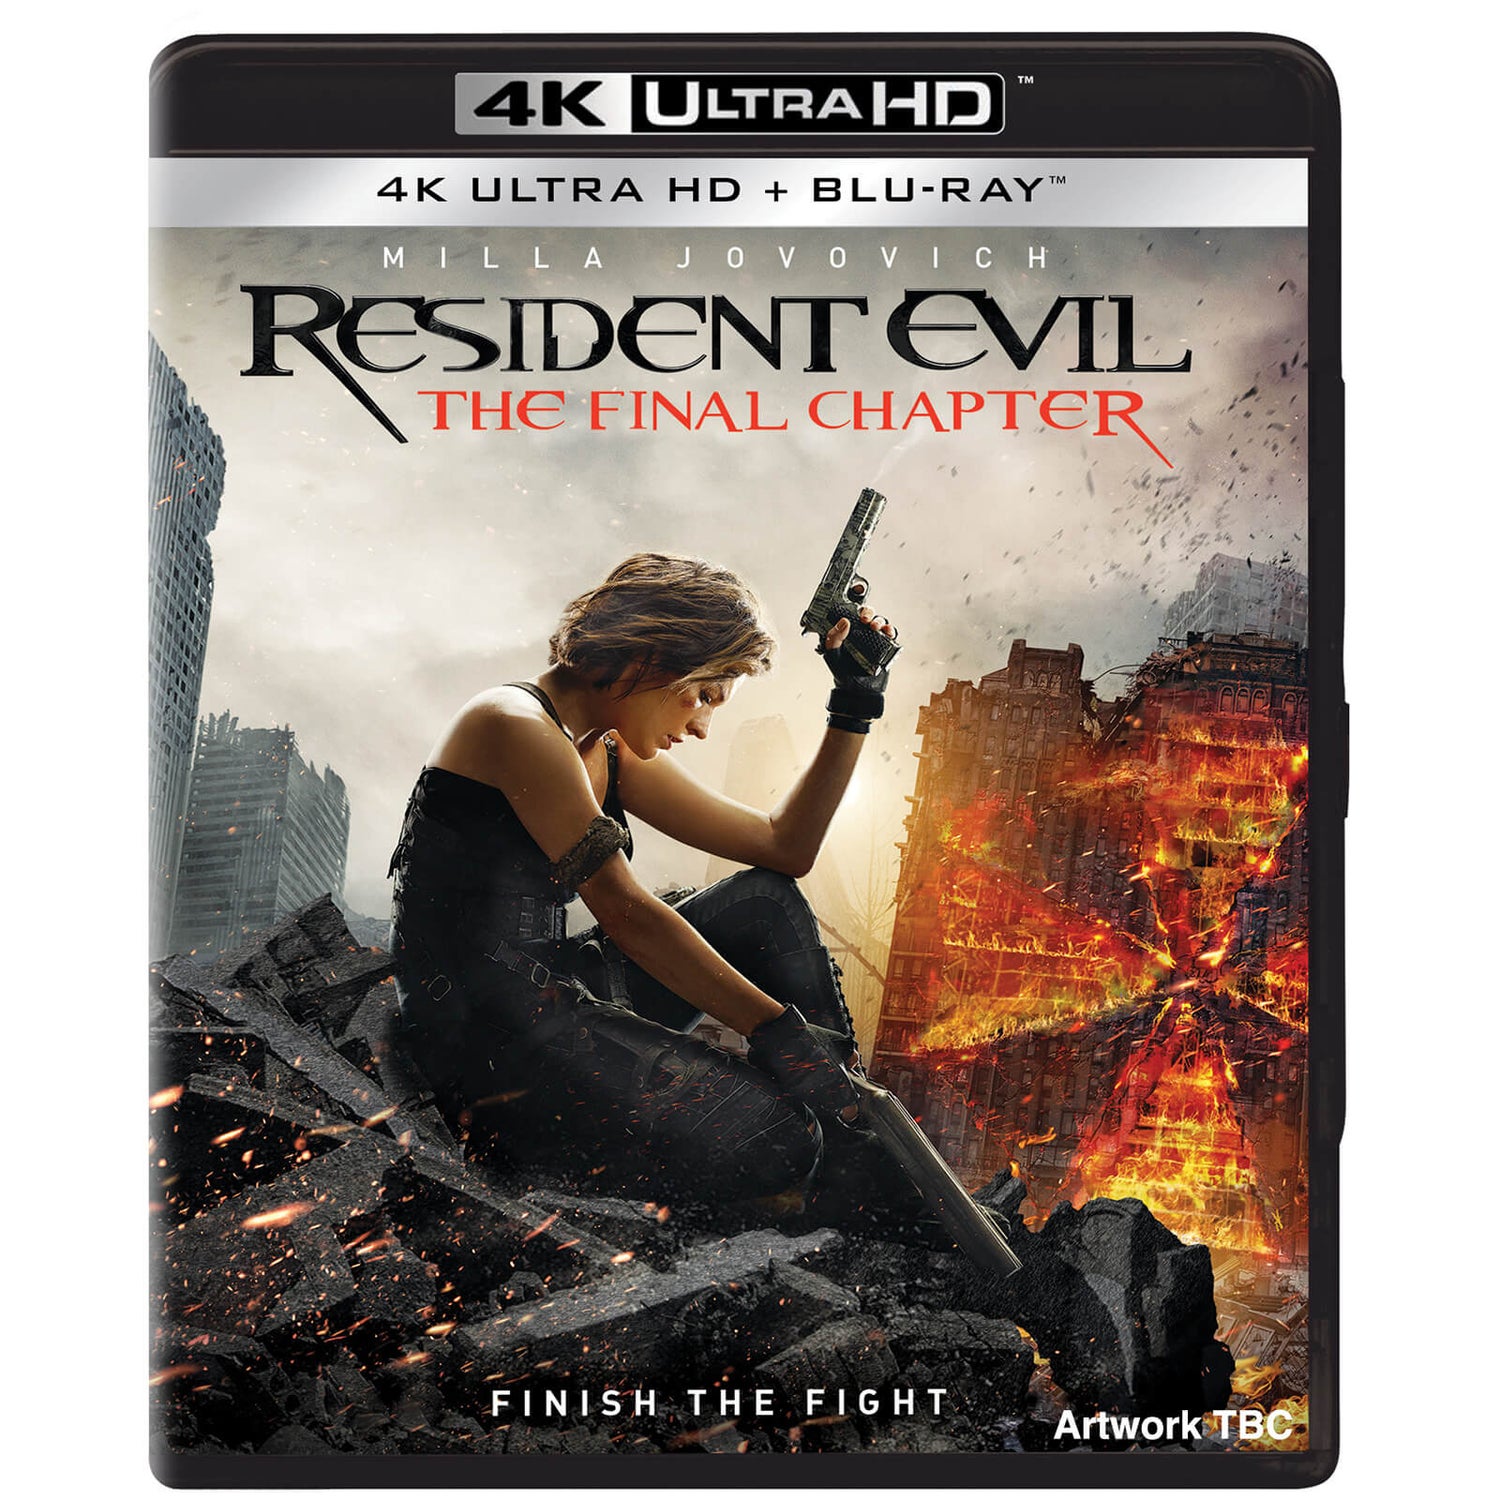 Resident Evil: The Final Chapter - 4K Ultra HD (Includes Blu-ray)